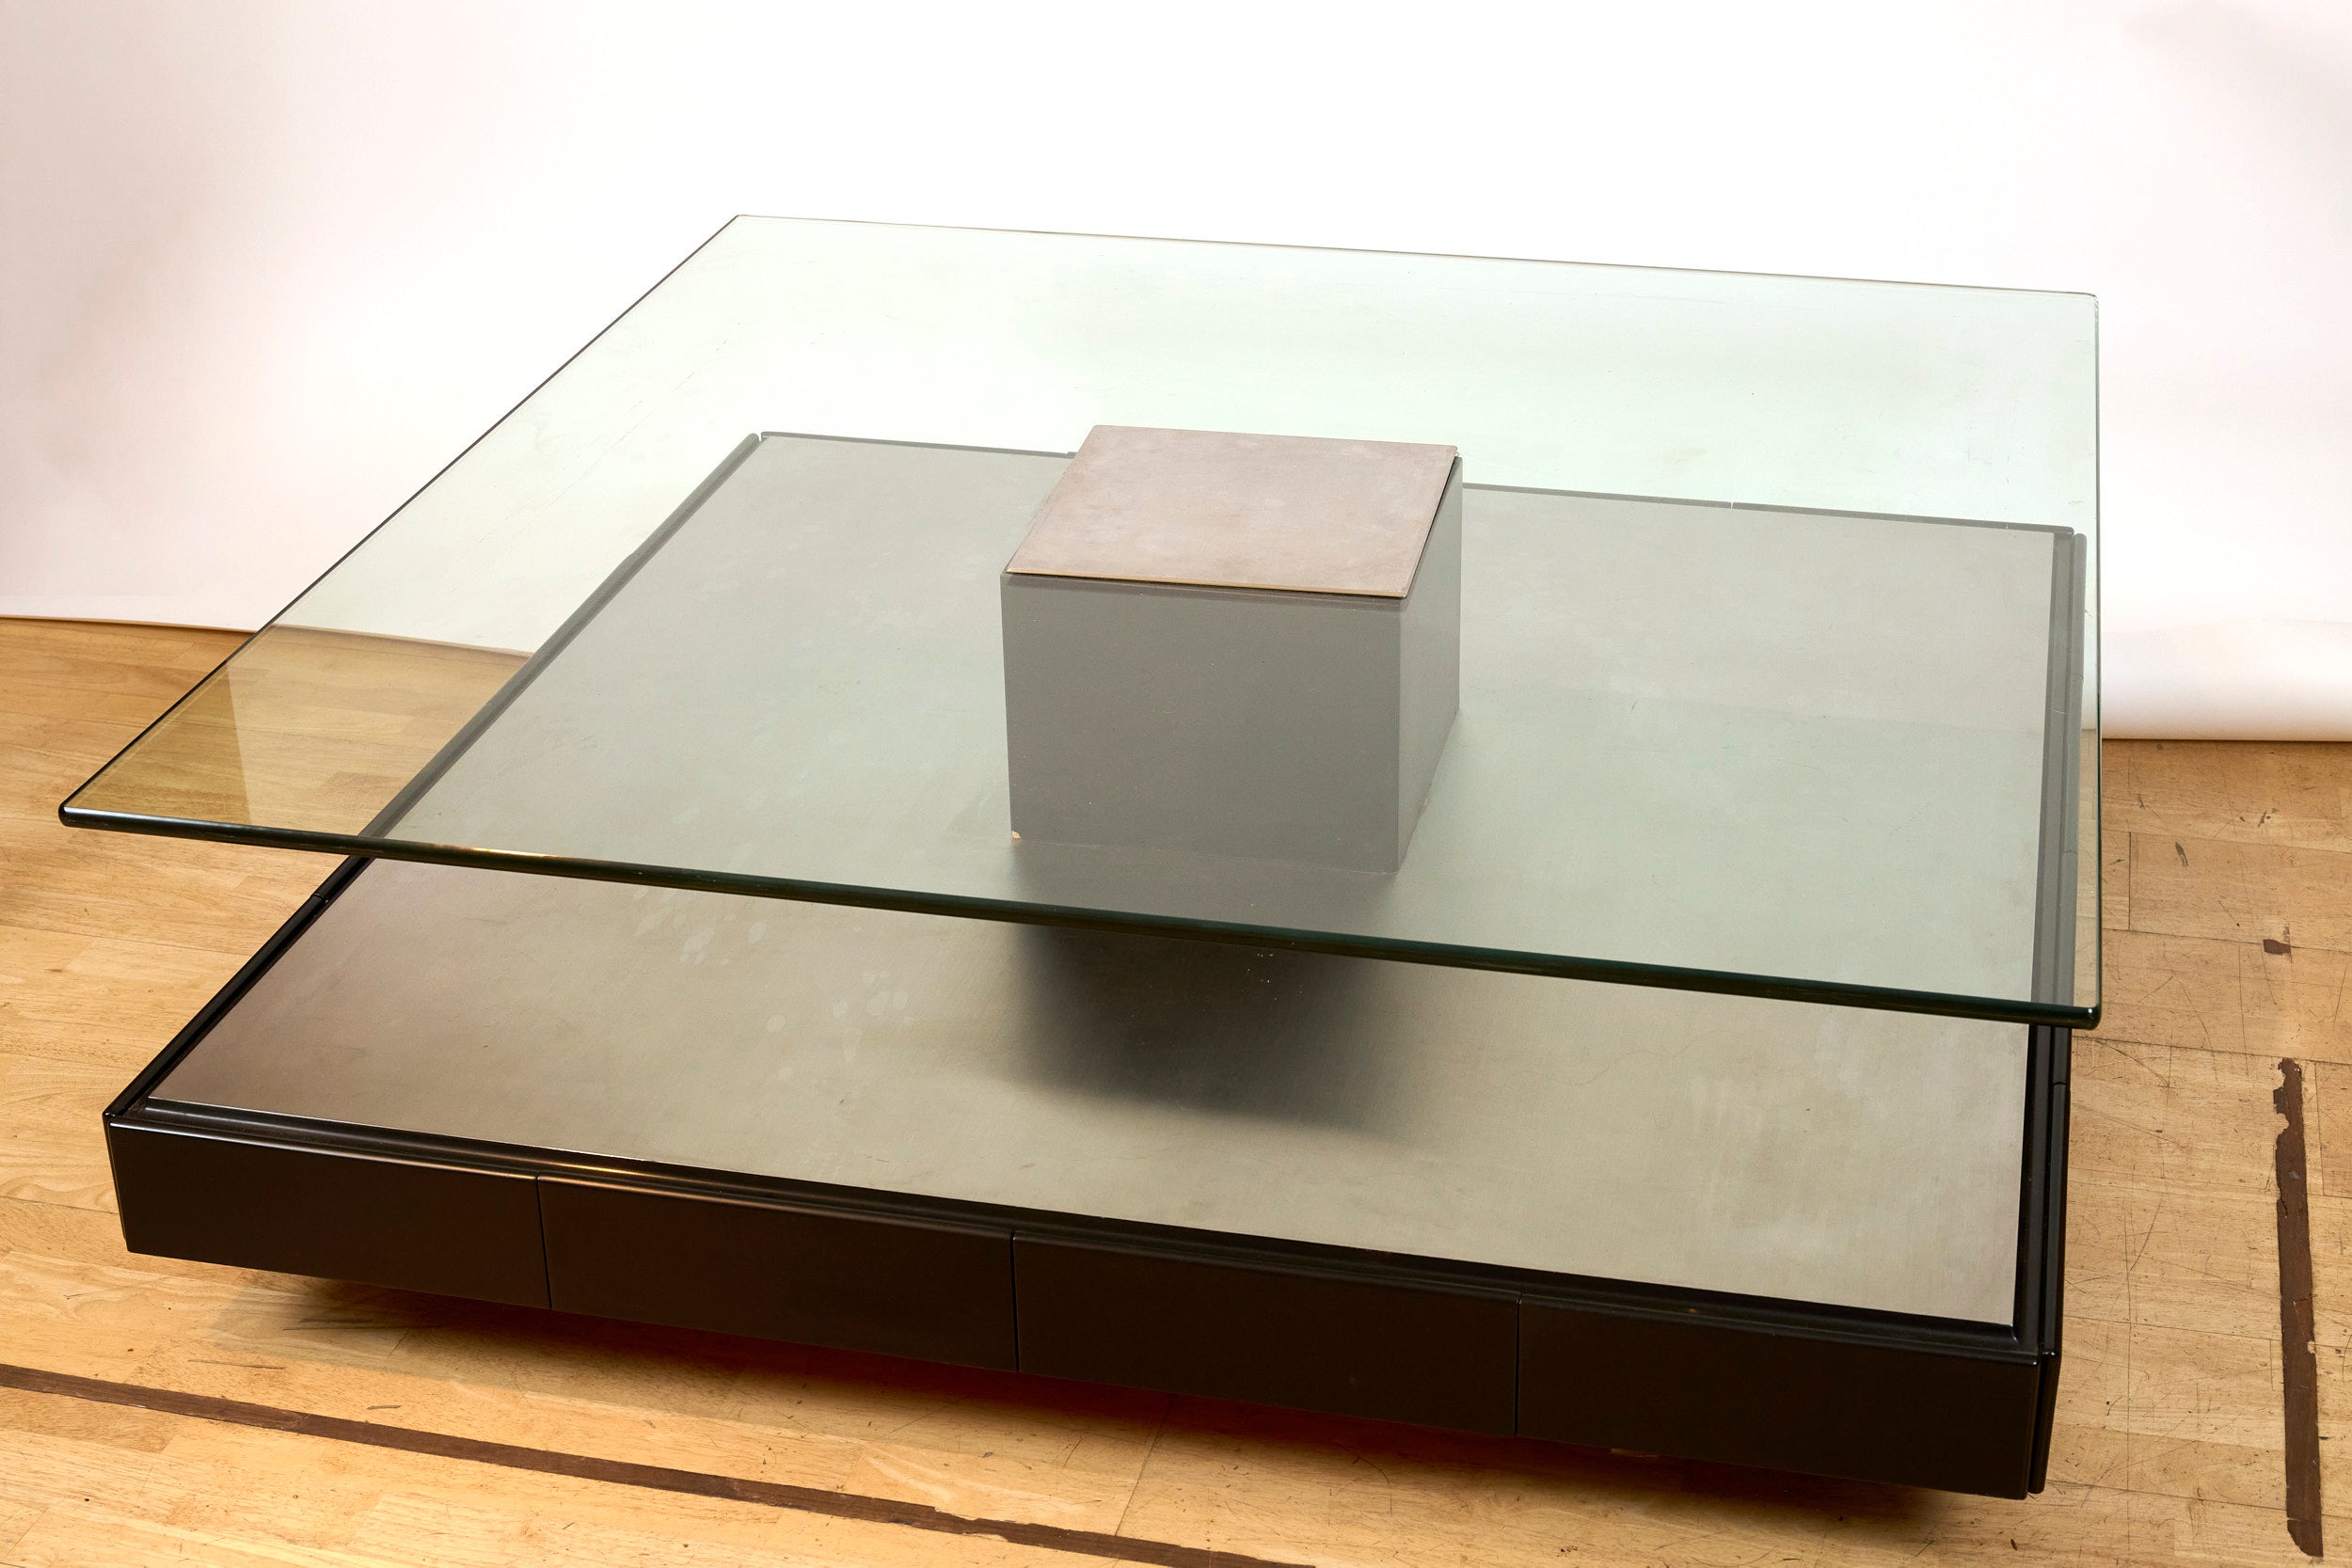 Marco Fantoni coffee table for Tecno c1970.

A superb minimalist coffee table with a brushed metal base on wood containing eight drawers, a thick glass shelf with brushed metal insert. Eight rollers underneath the base for ease of movement.

In